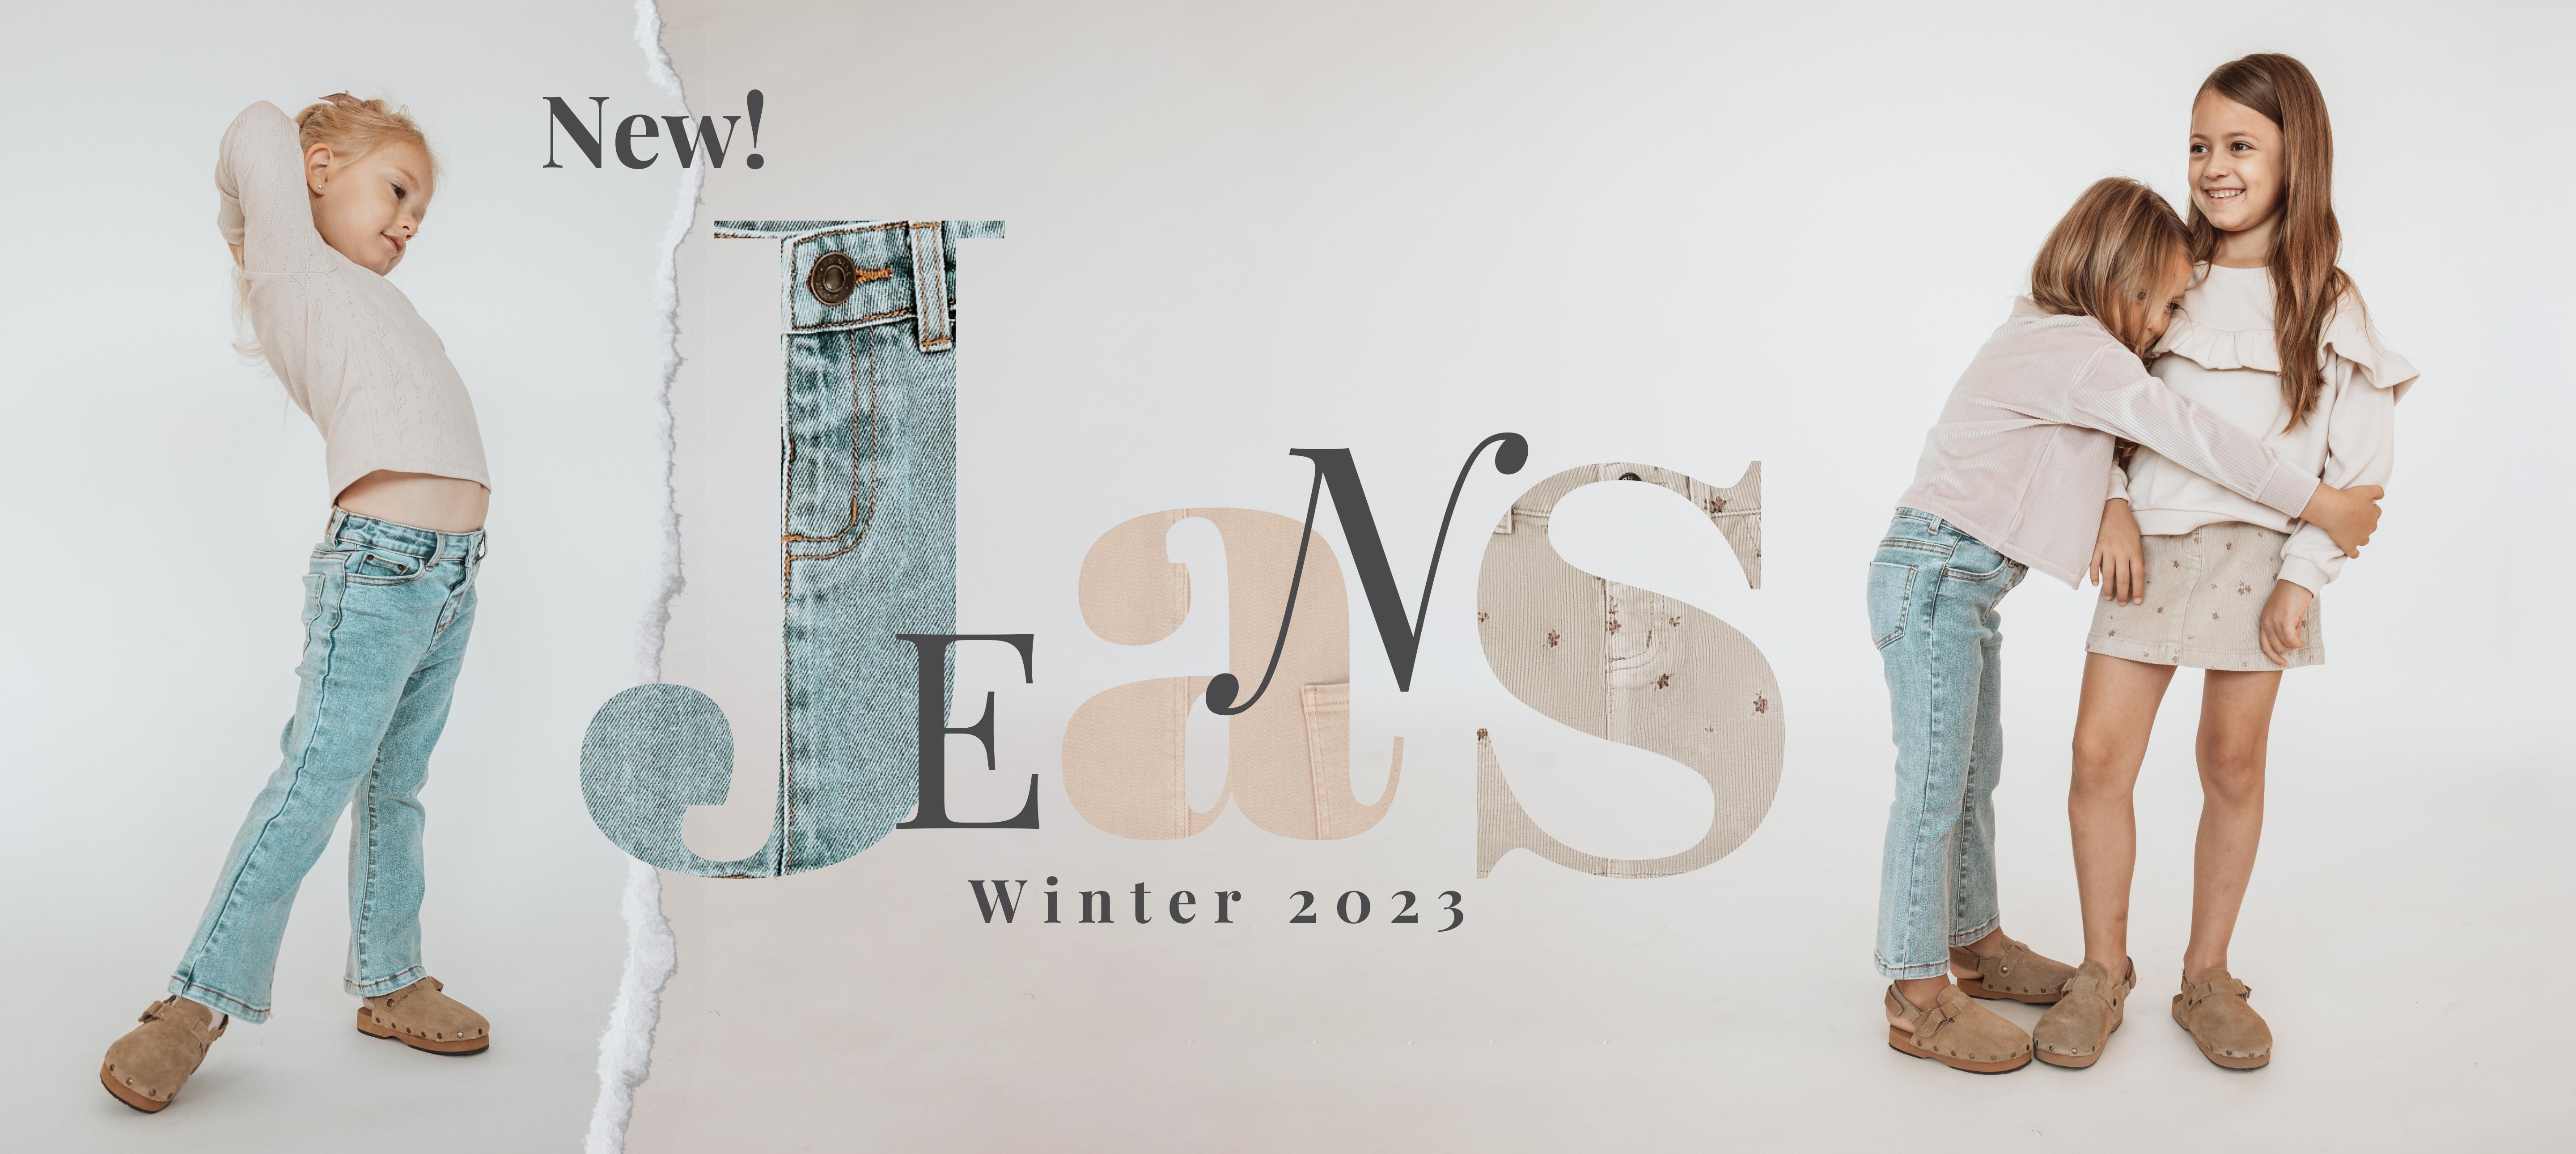 NEW! JEANS. WINTER 2023